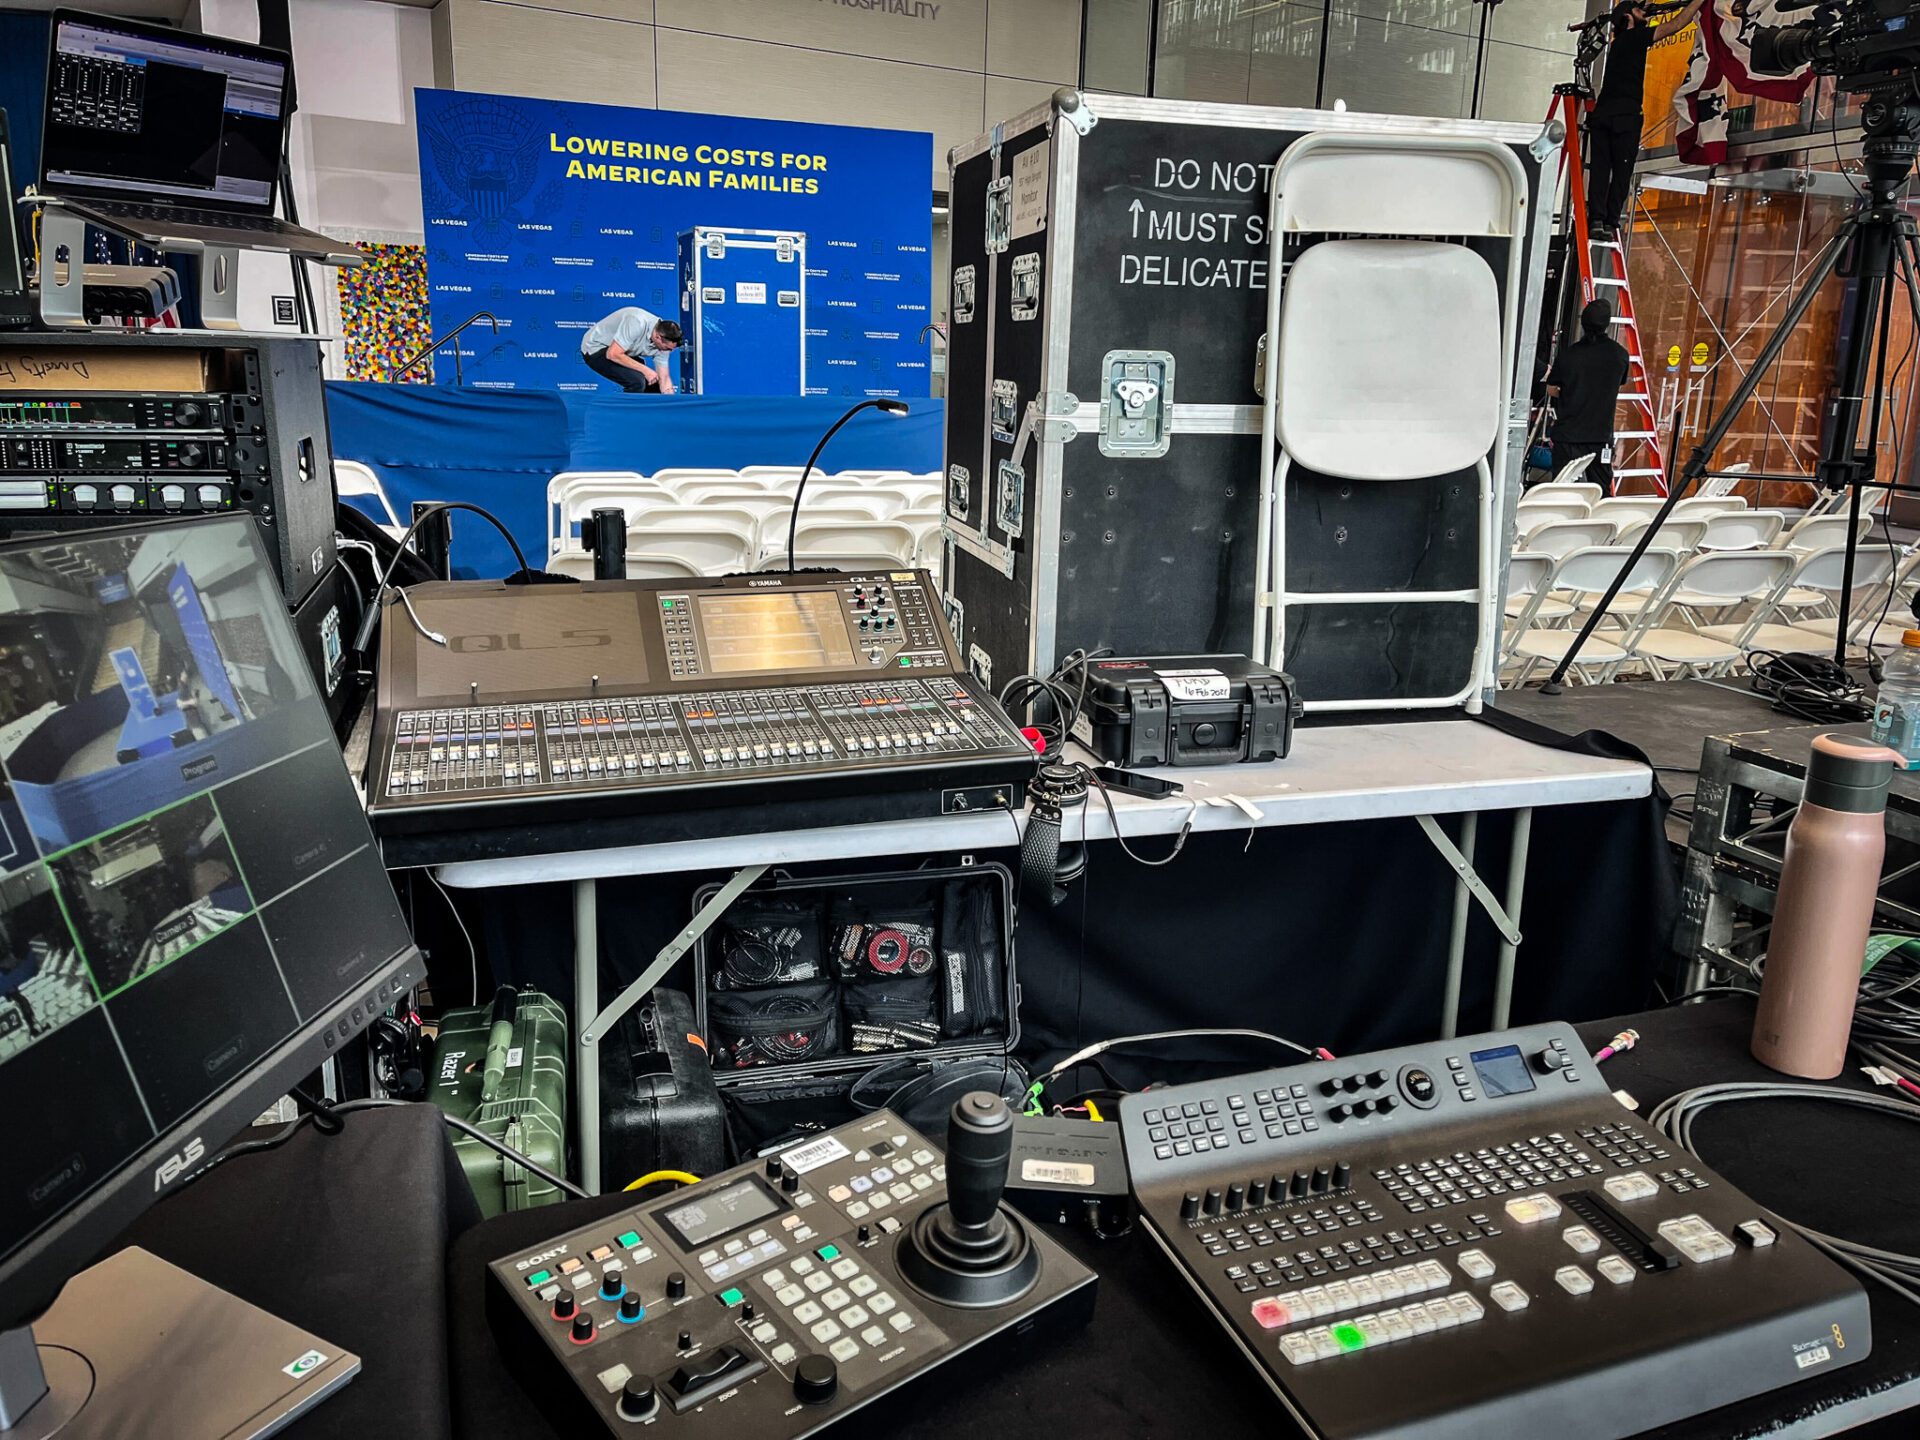 Video Control Table at a Press Conference